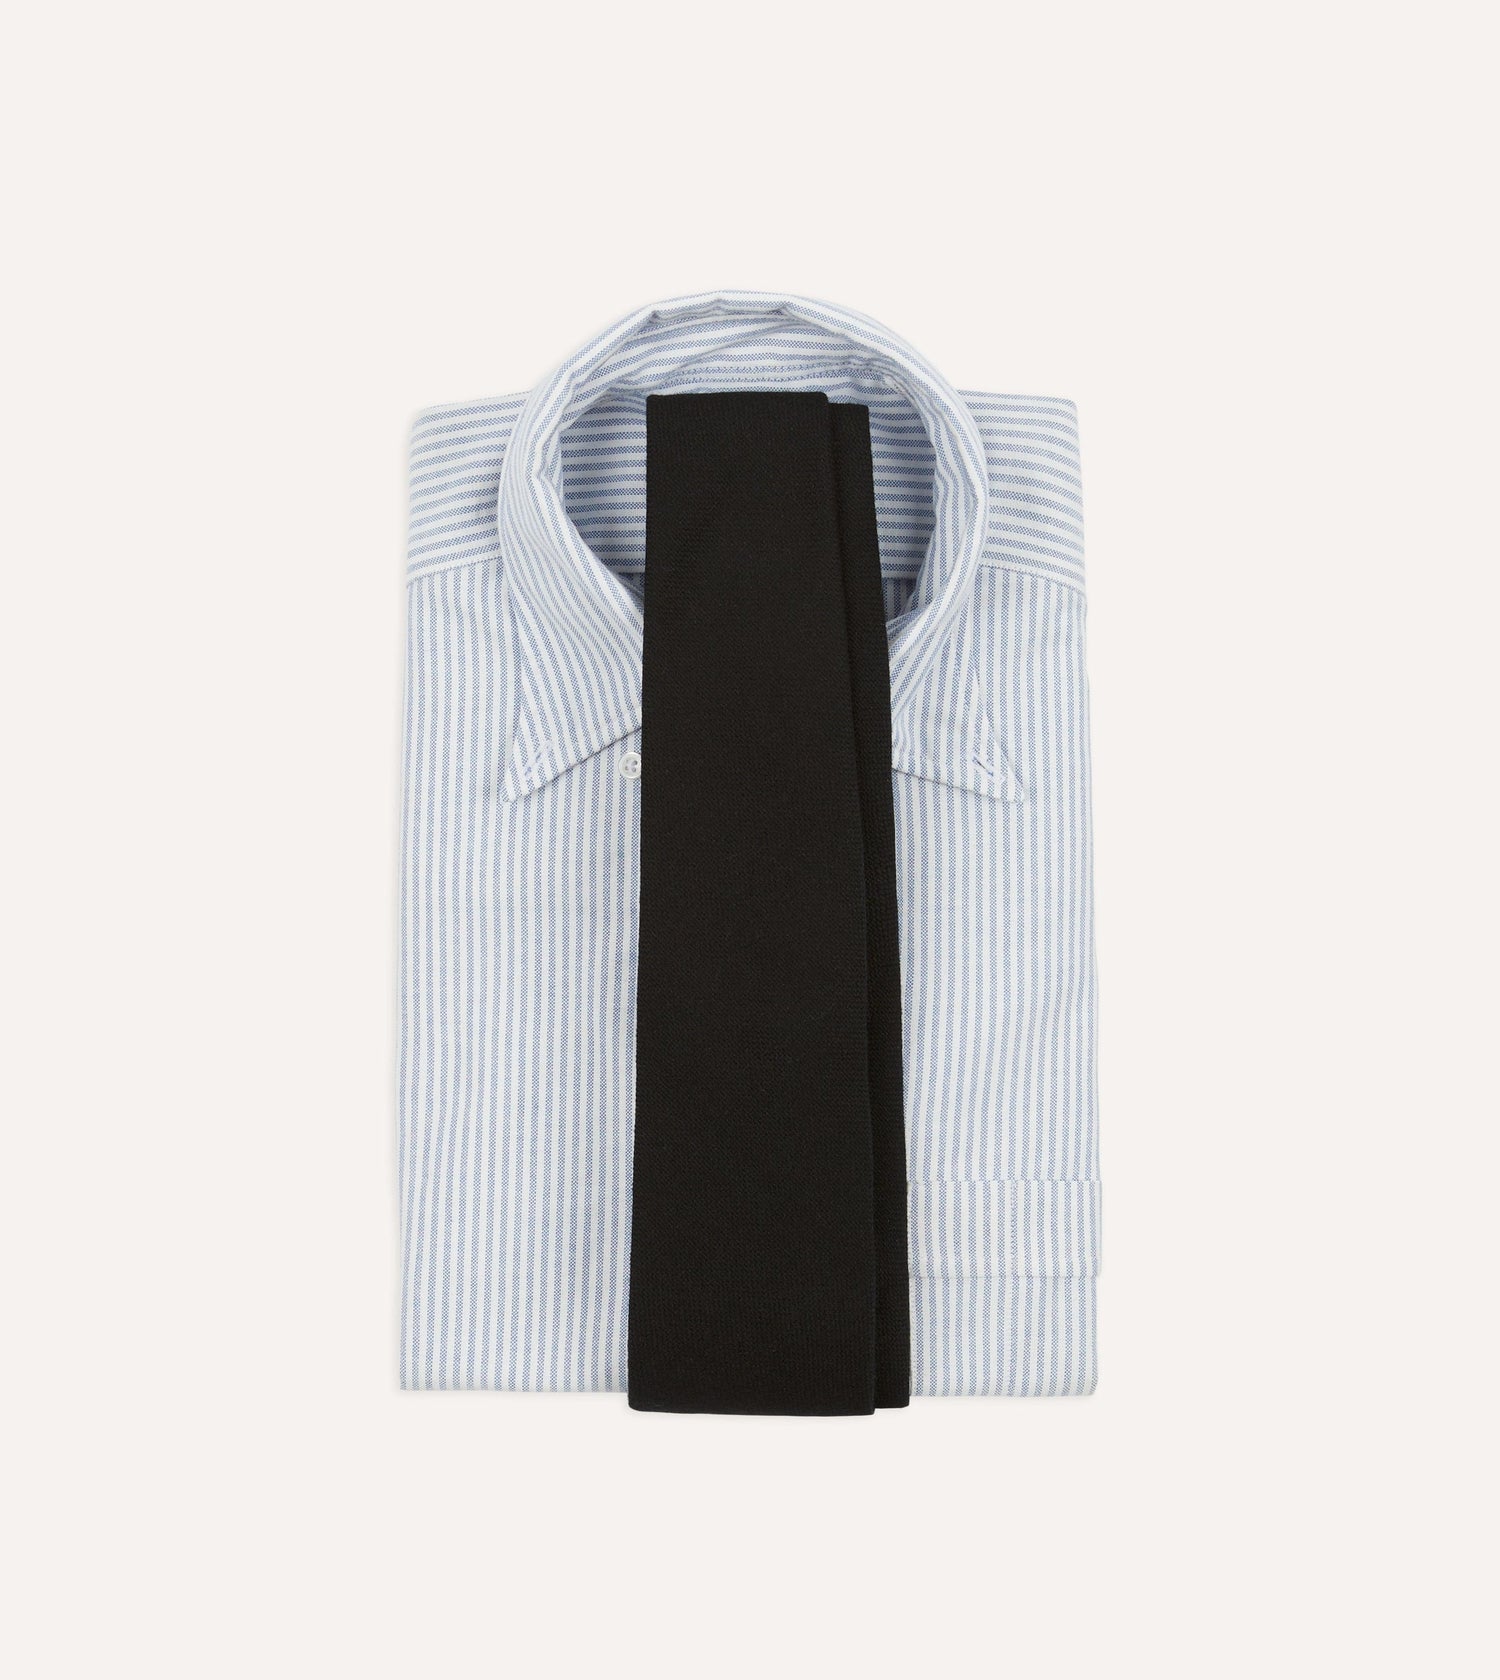 Black Pure Cashmere Solid Tipped Tie